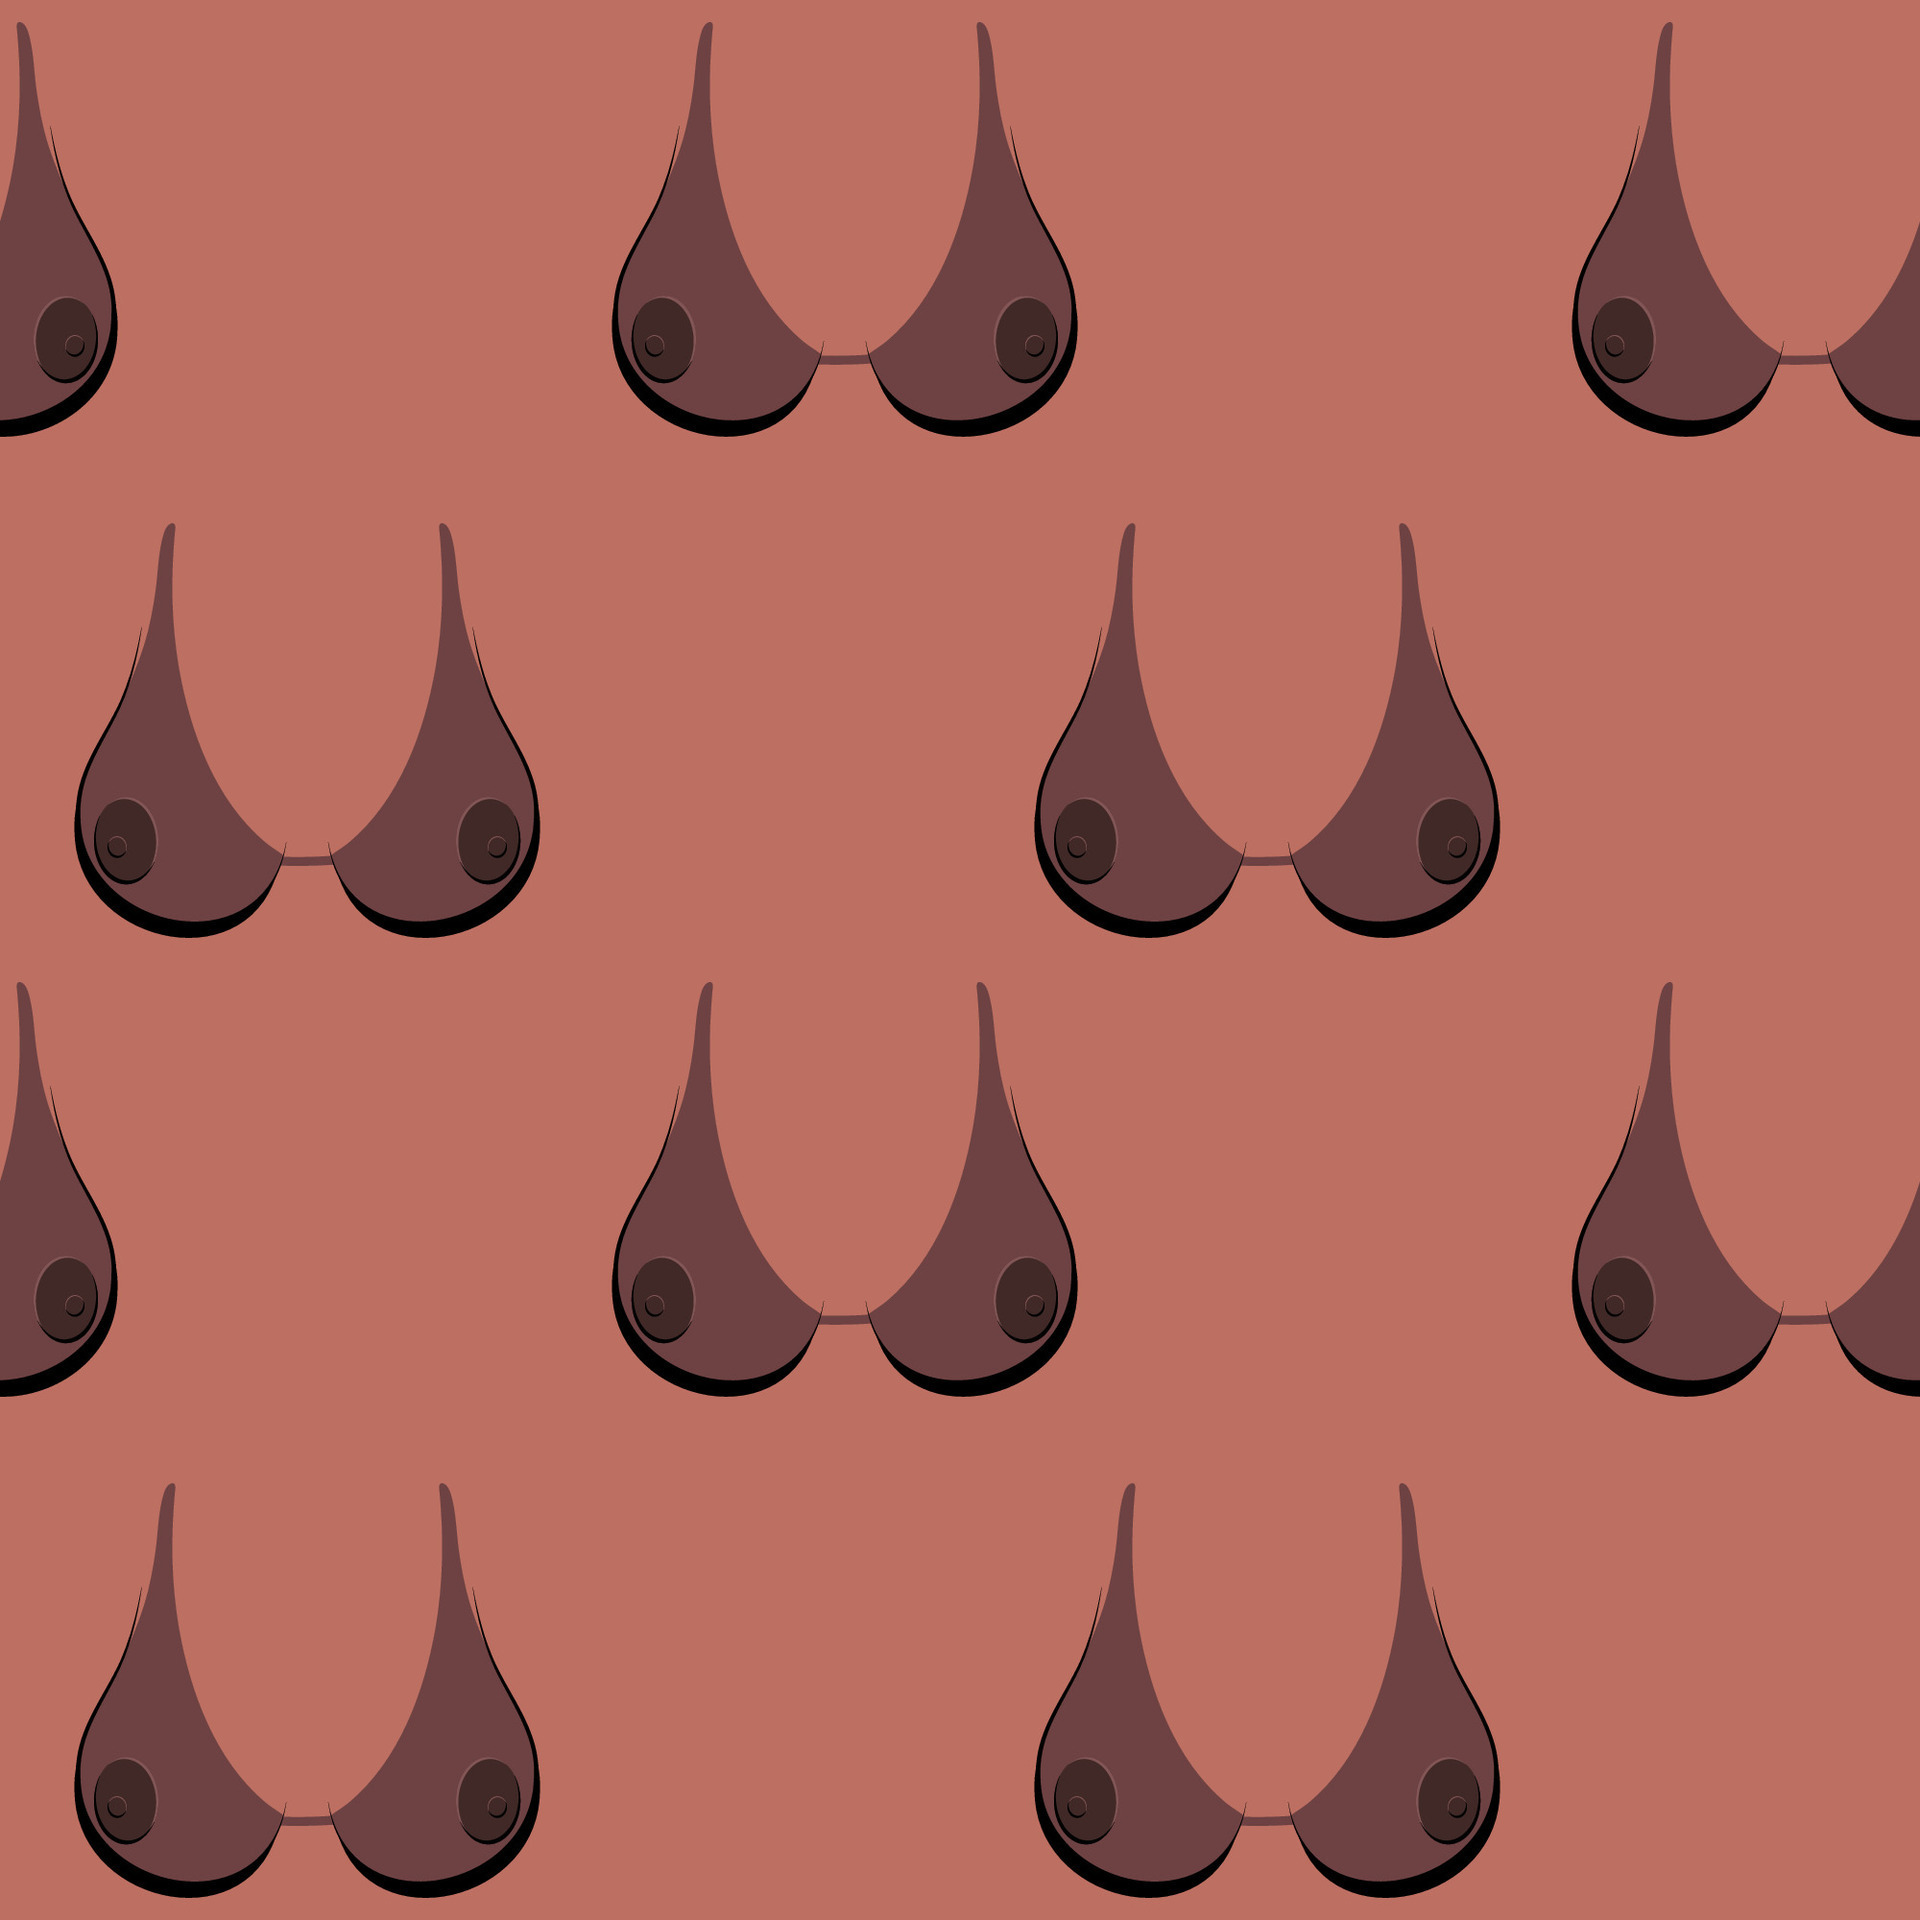 https://static.vecteezy.com/system/resources/previews/028/840/521/original/seamless-pattern-of-female-beautiful-boobs-black-skin-colour-tan-colour-female-body-vector.jpg